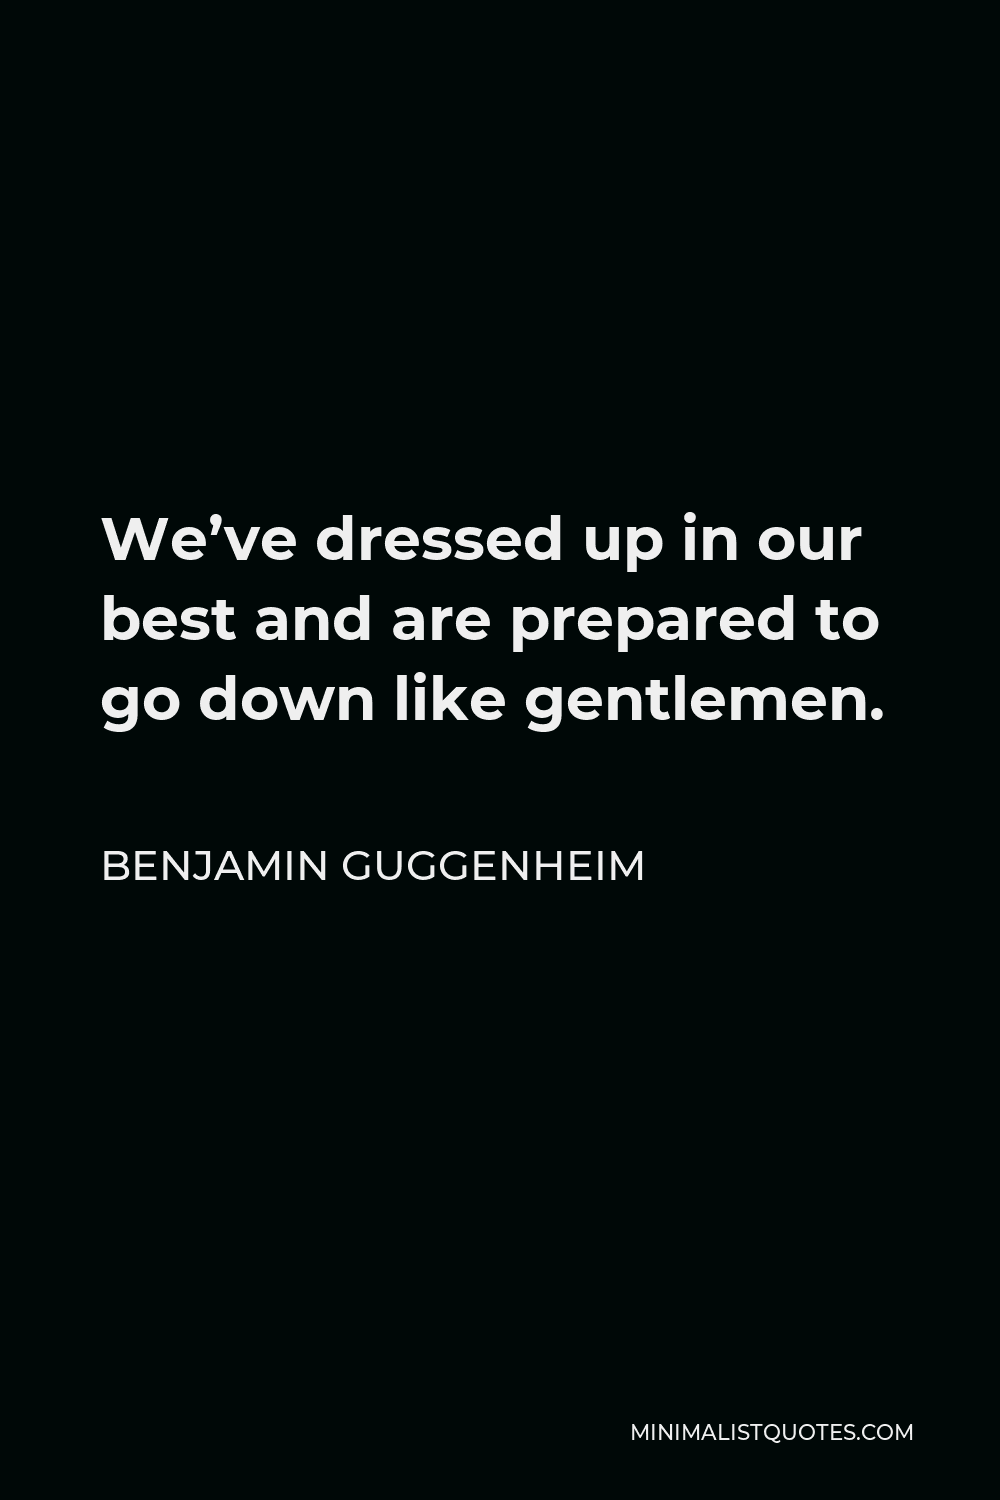 Benjamin Guggenheim Quote - We’ve dressed up in our best and are prepared to go down like gentlemen.